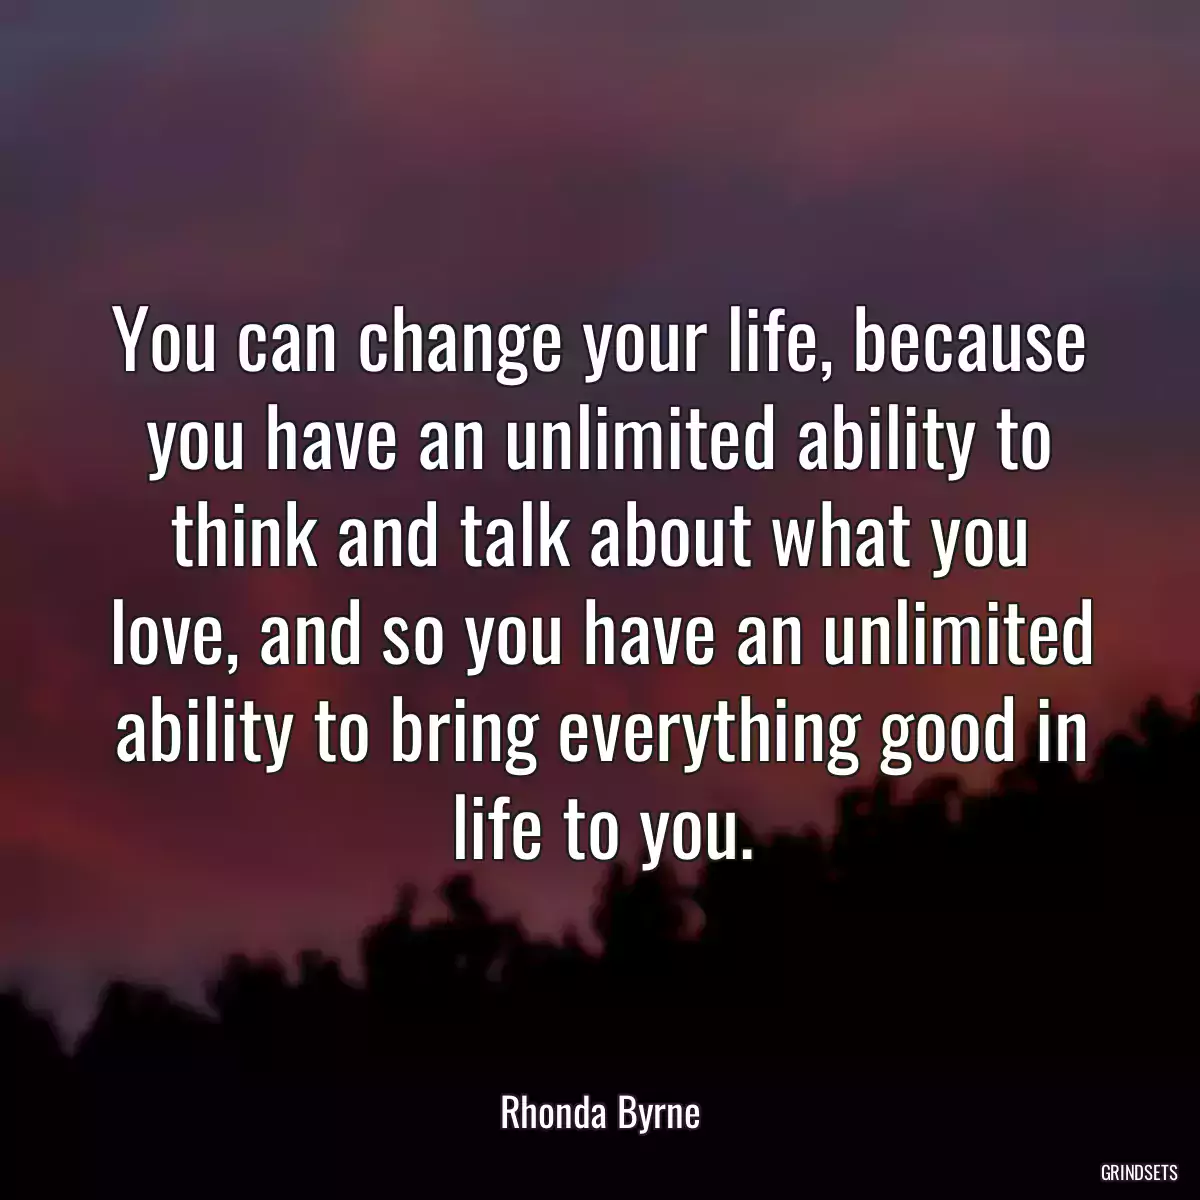 You can change your life, because you have an unlimited ability to think and talk about what you love, and so you have an unlimited ability to bring everything good in life to you.